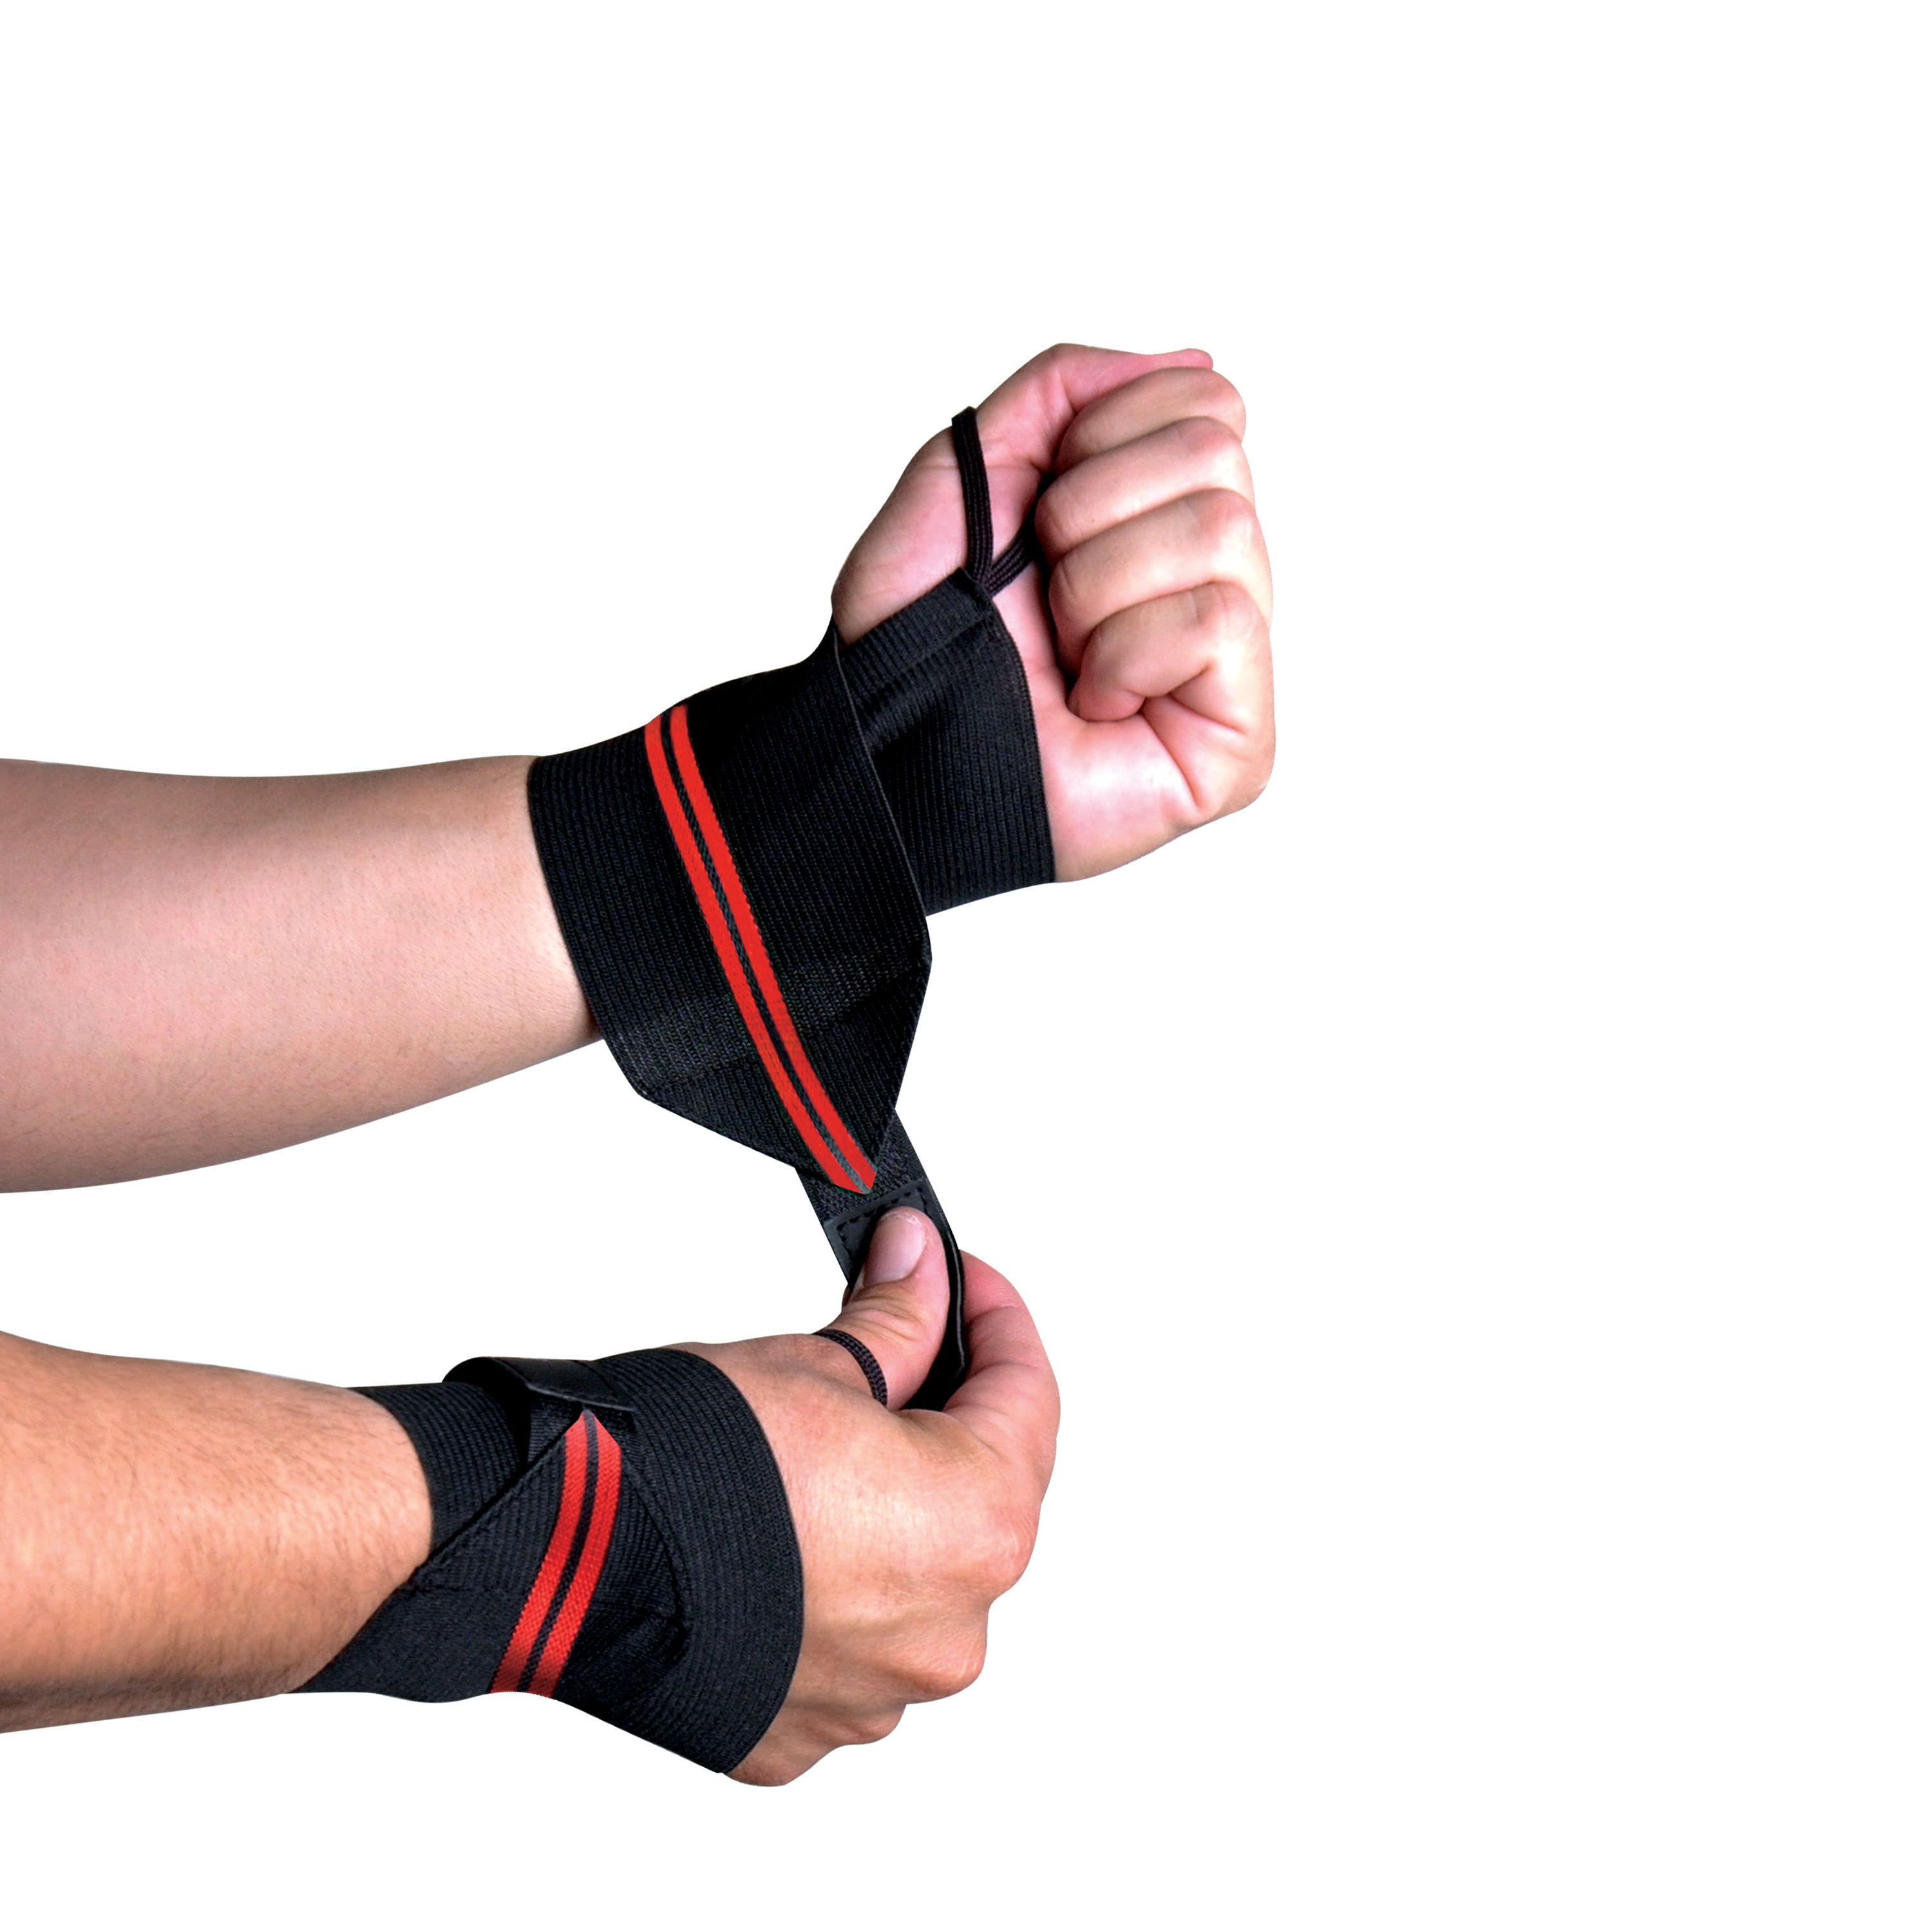 BLACK WRIST WRAPS Elastic Support Weight Lifting w/ Thumb Loop Meister Straps 